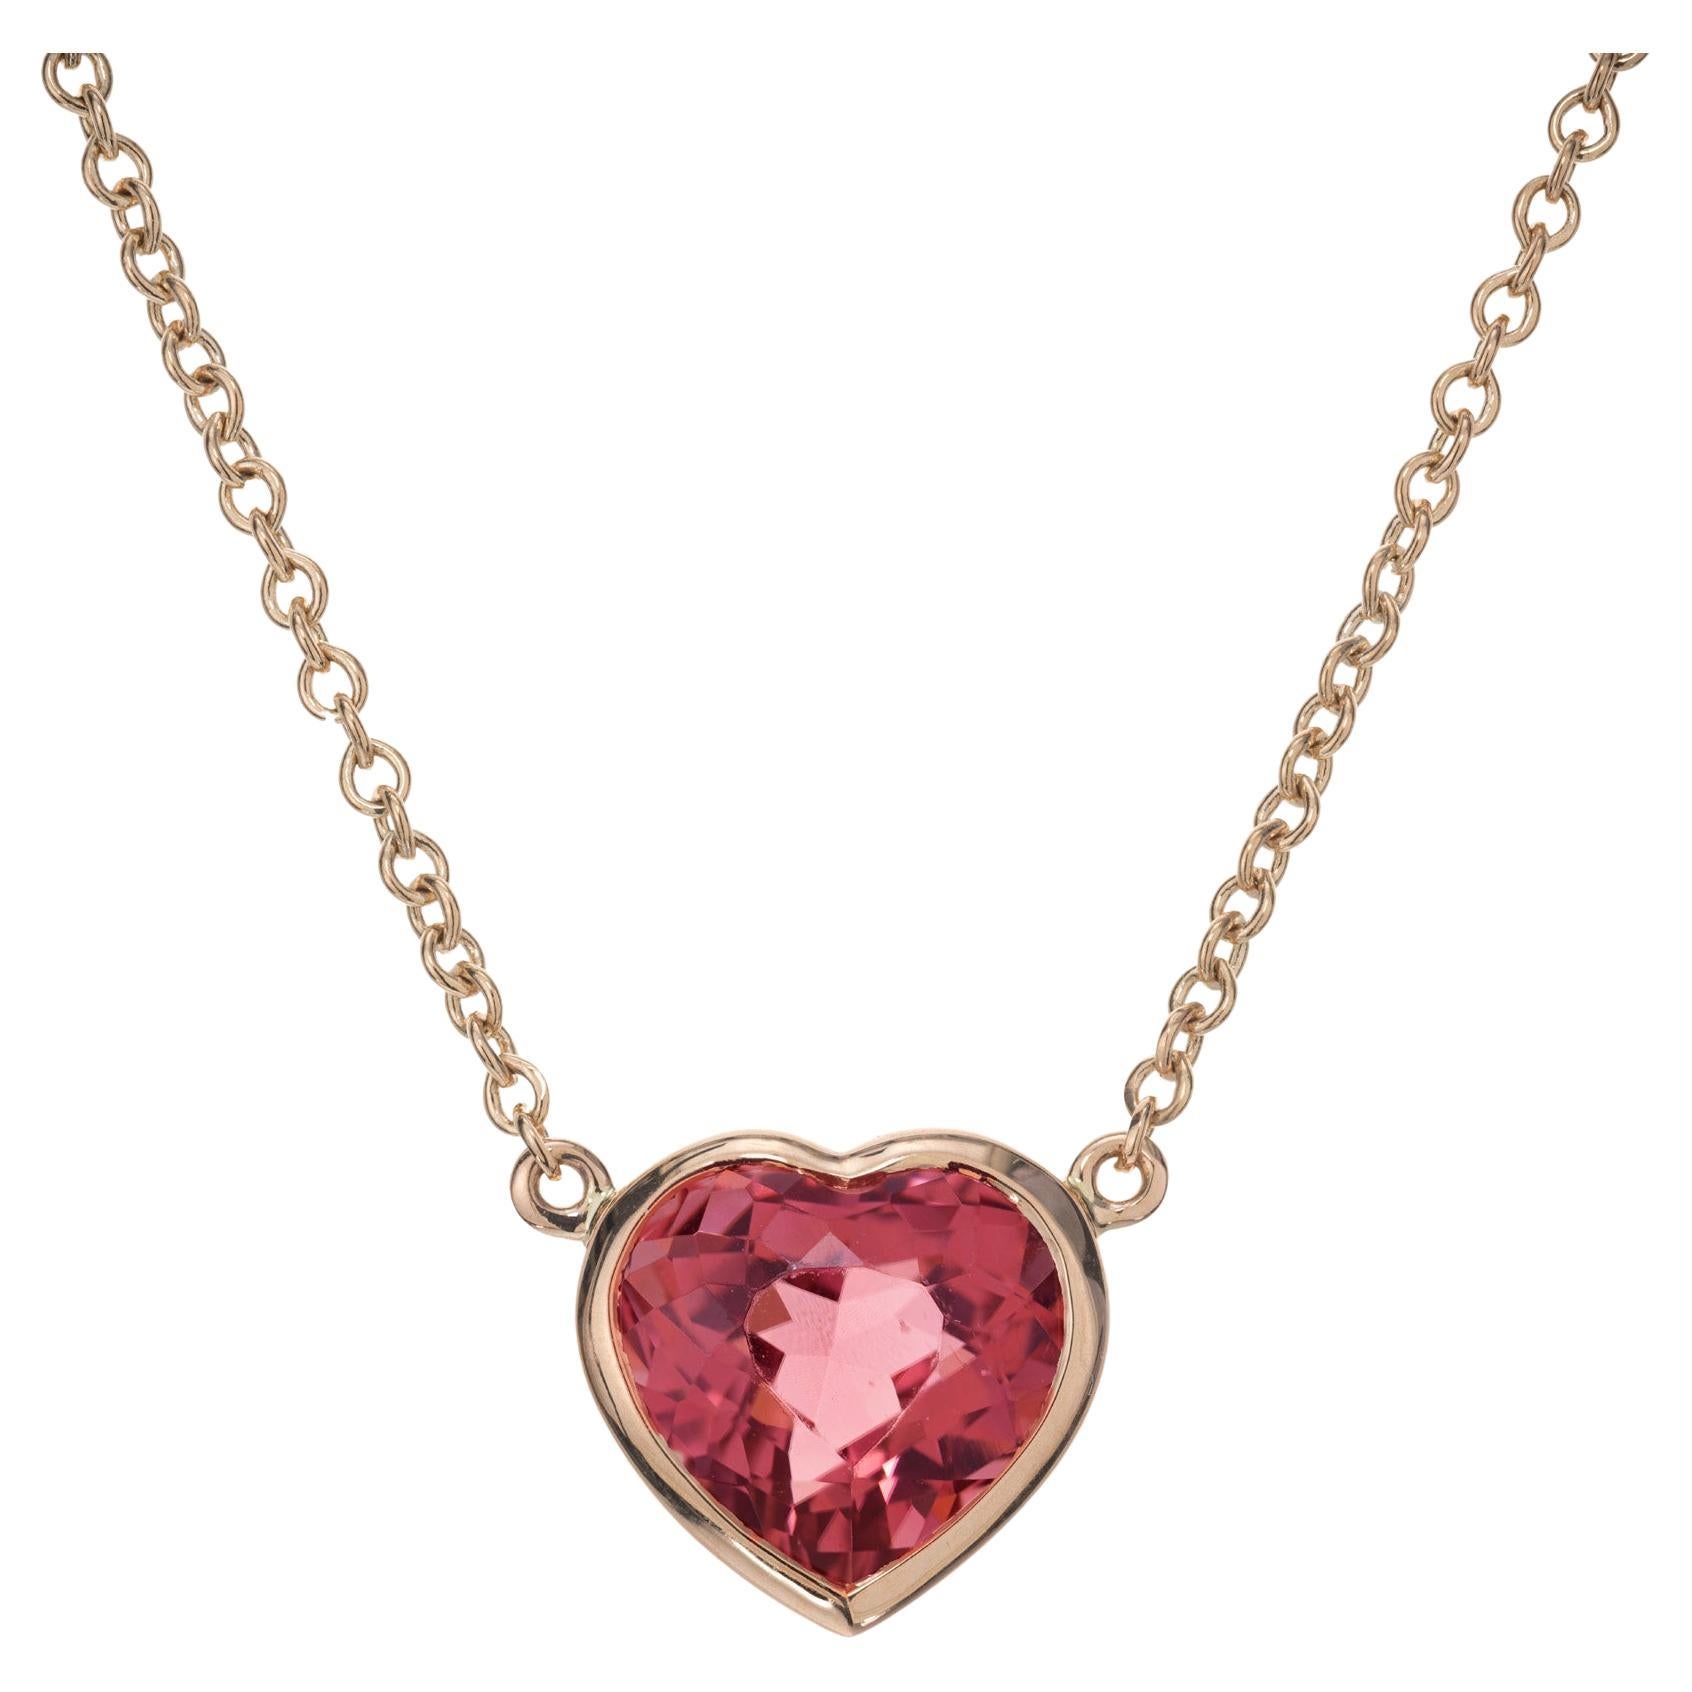 Peter Suchy 3.29 Carat Pink Tourmaline Rose Gold Heart Pendant Necklace For Sale